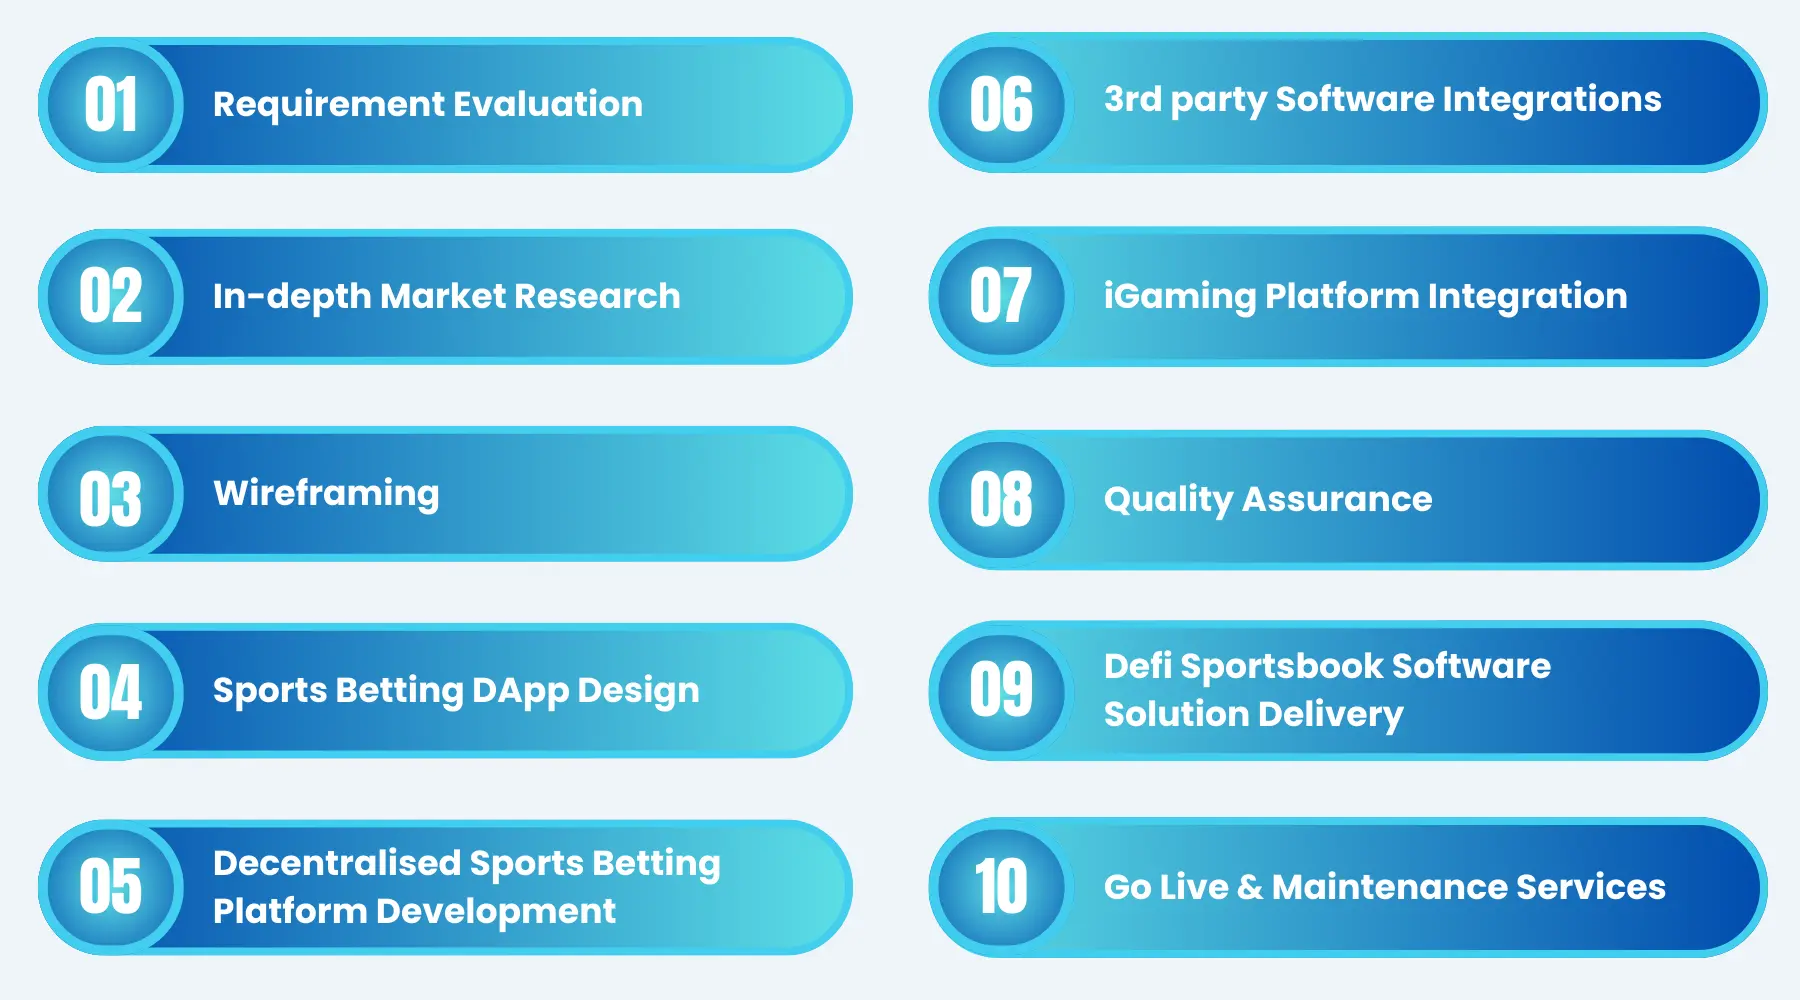 DeFi Sports Betting Software Solutions